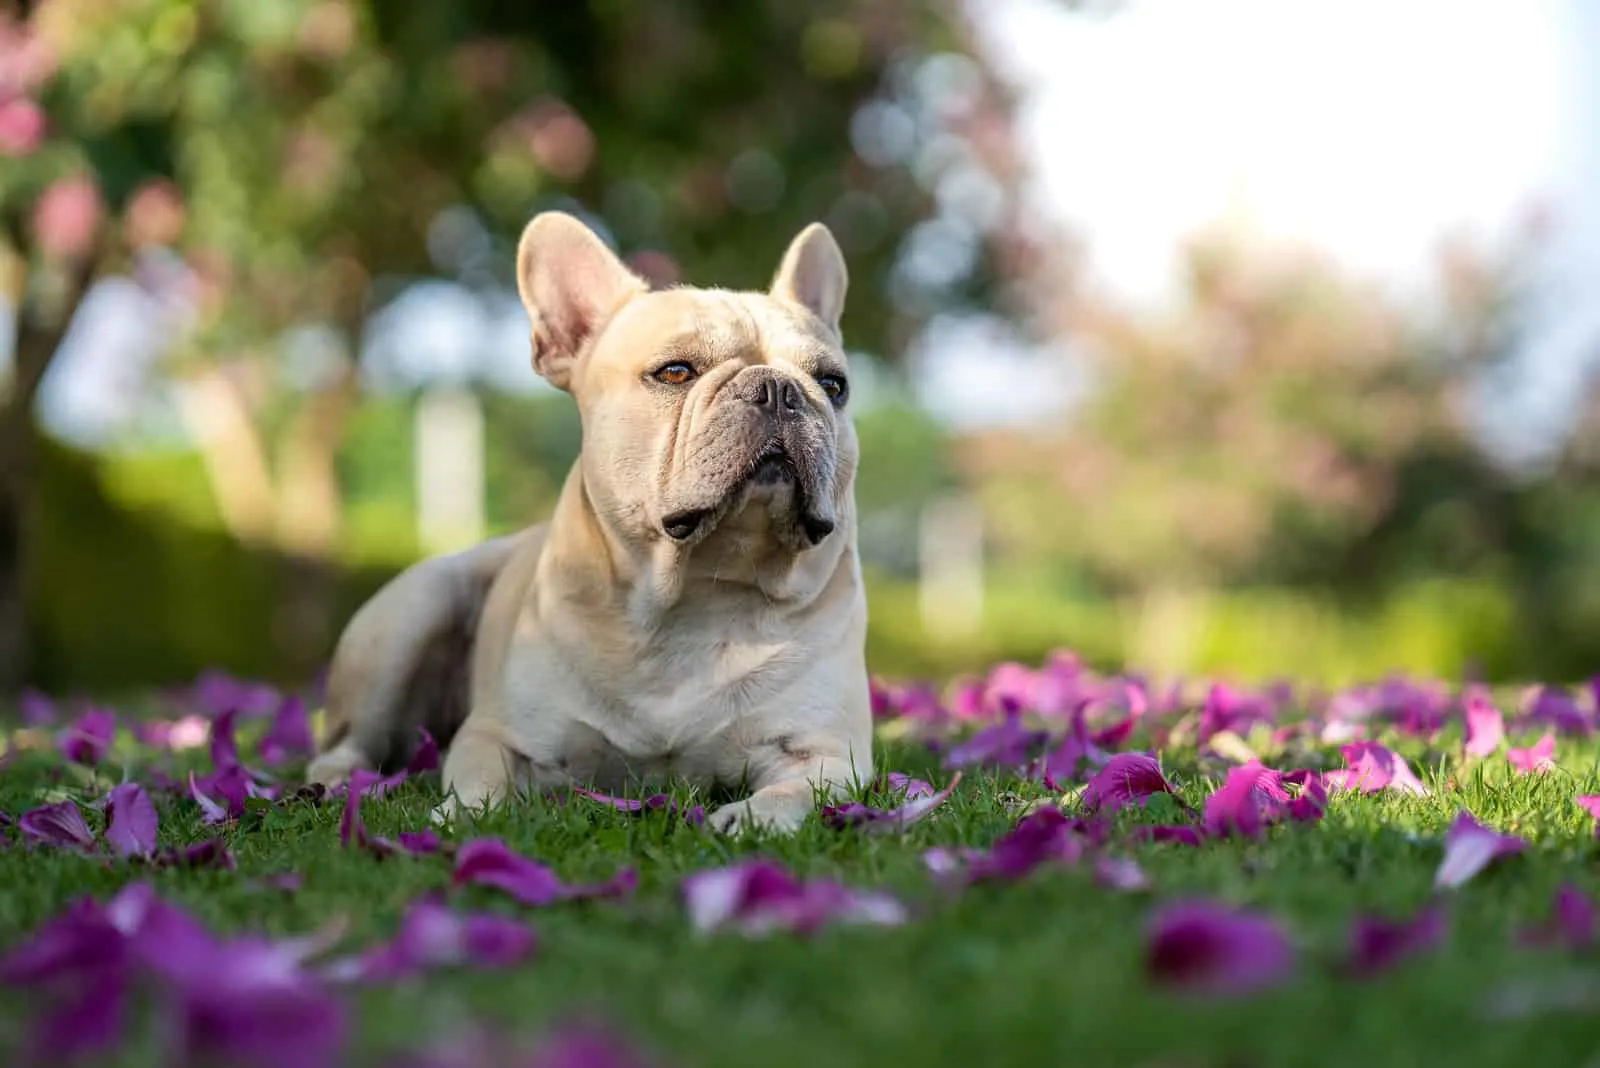 Cute french bulldog lying on the grass in the garden